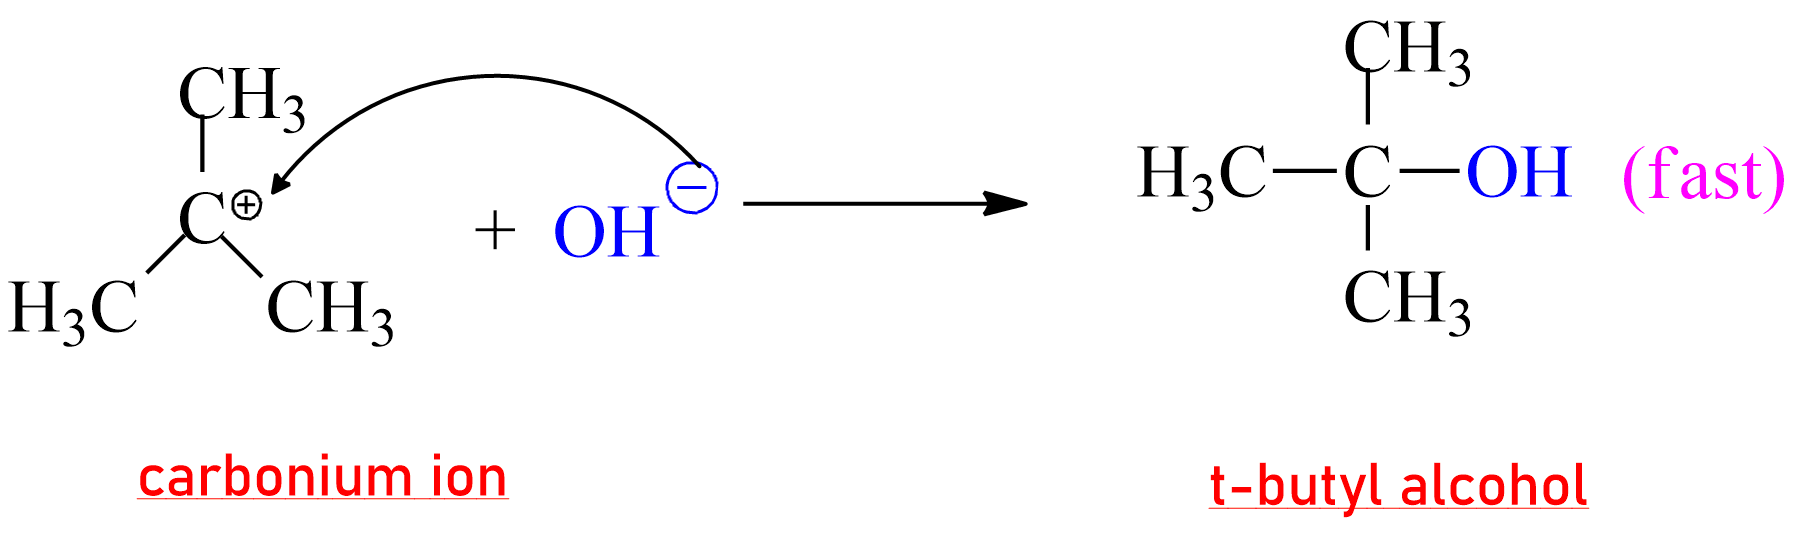 Carbonium ion to product formation of product in SN1 reaction